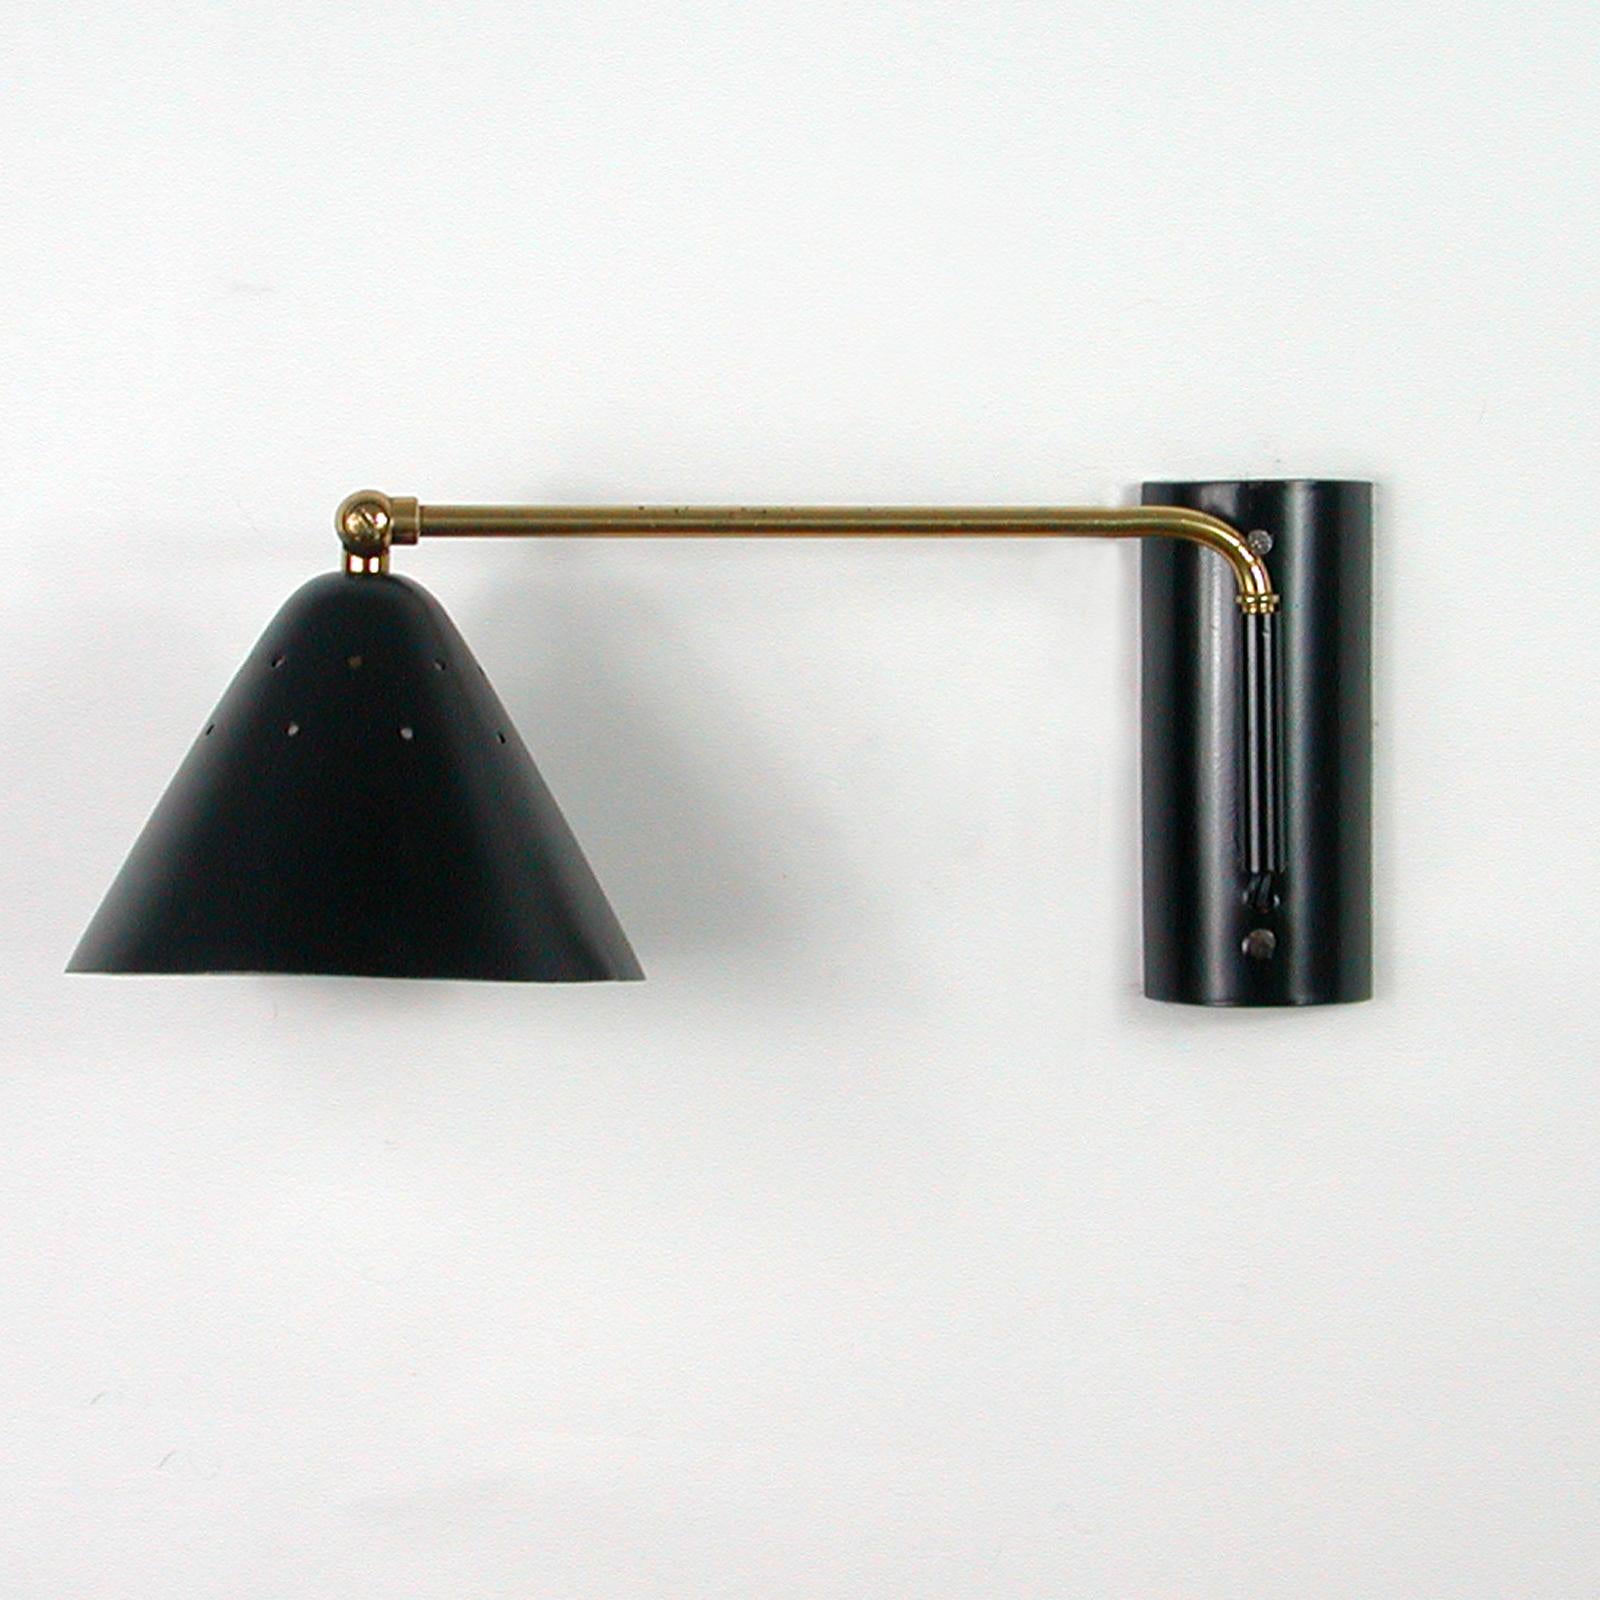 This 1950s articulating reading light was designed and manufactured in Italy by Stilux Milano. Executed in black lacquered metal and brass. A very architectural and refined wall lamp that can be easily adjusted to various positions.

The lamp has